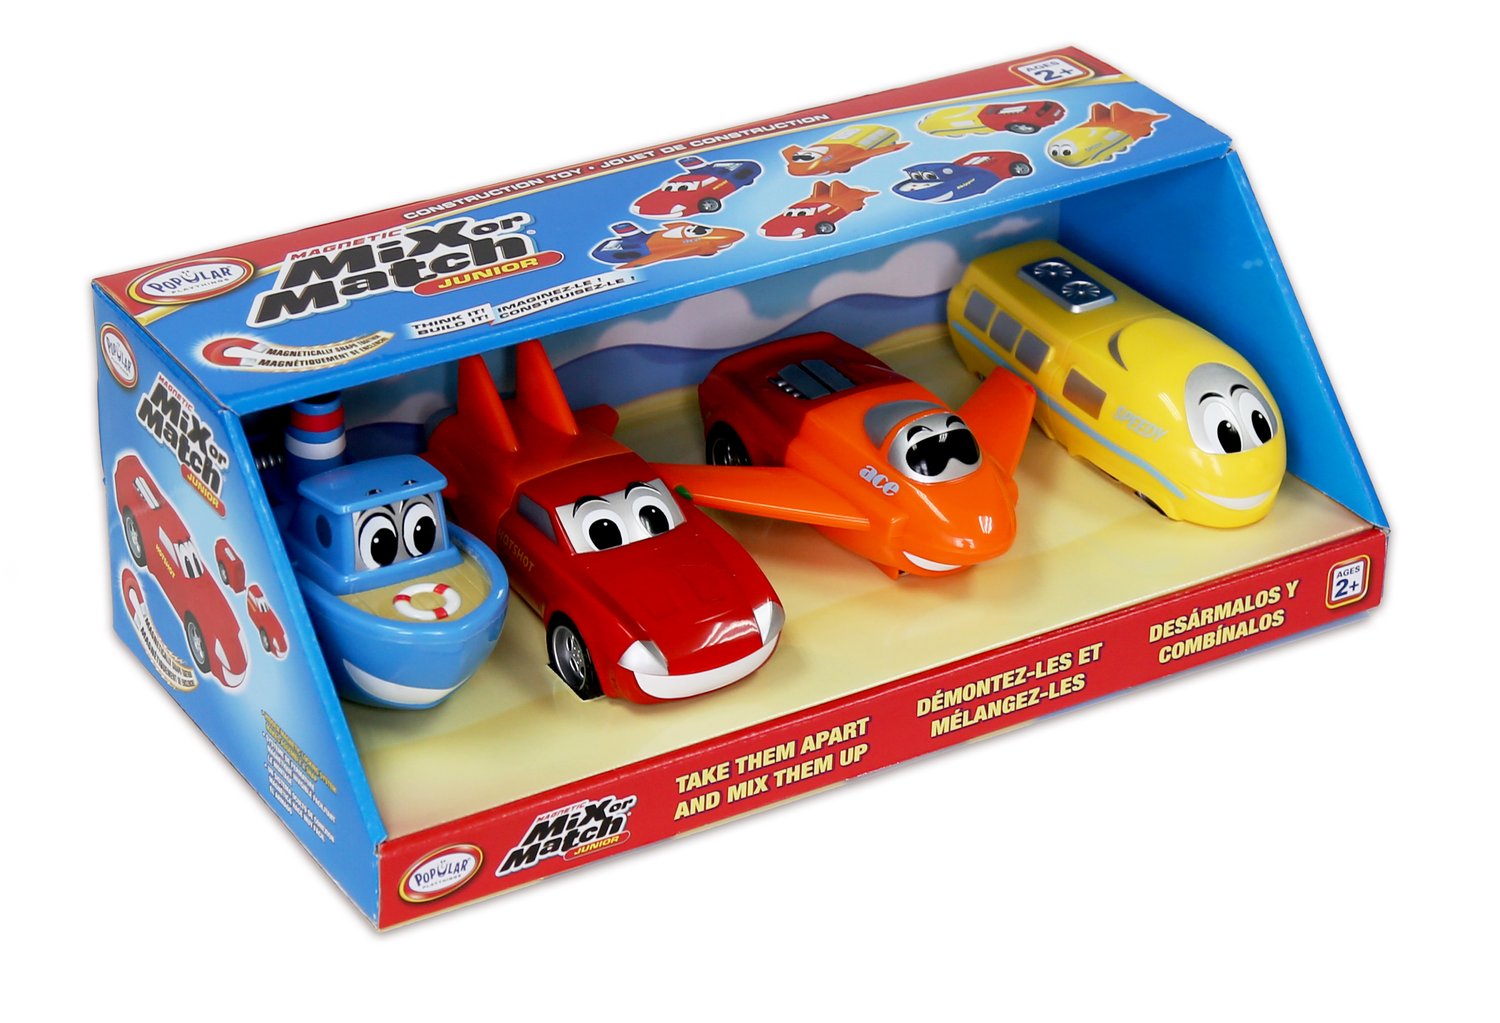 Popular Playthings Magnetic Mix Or Match Junior